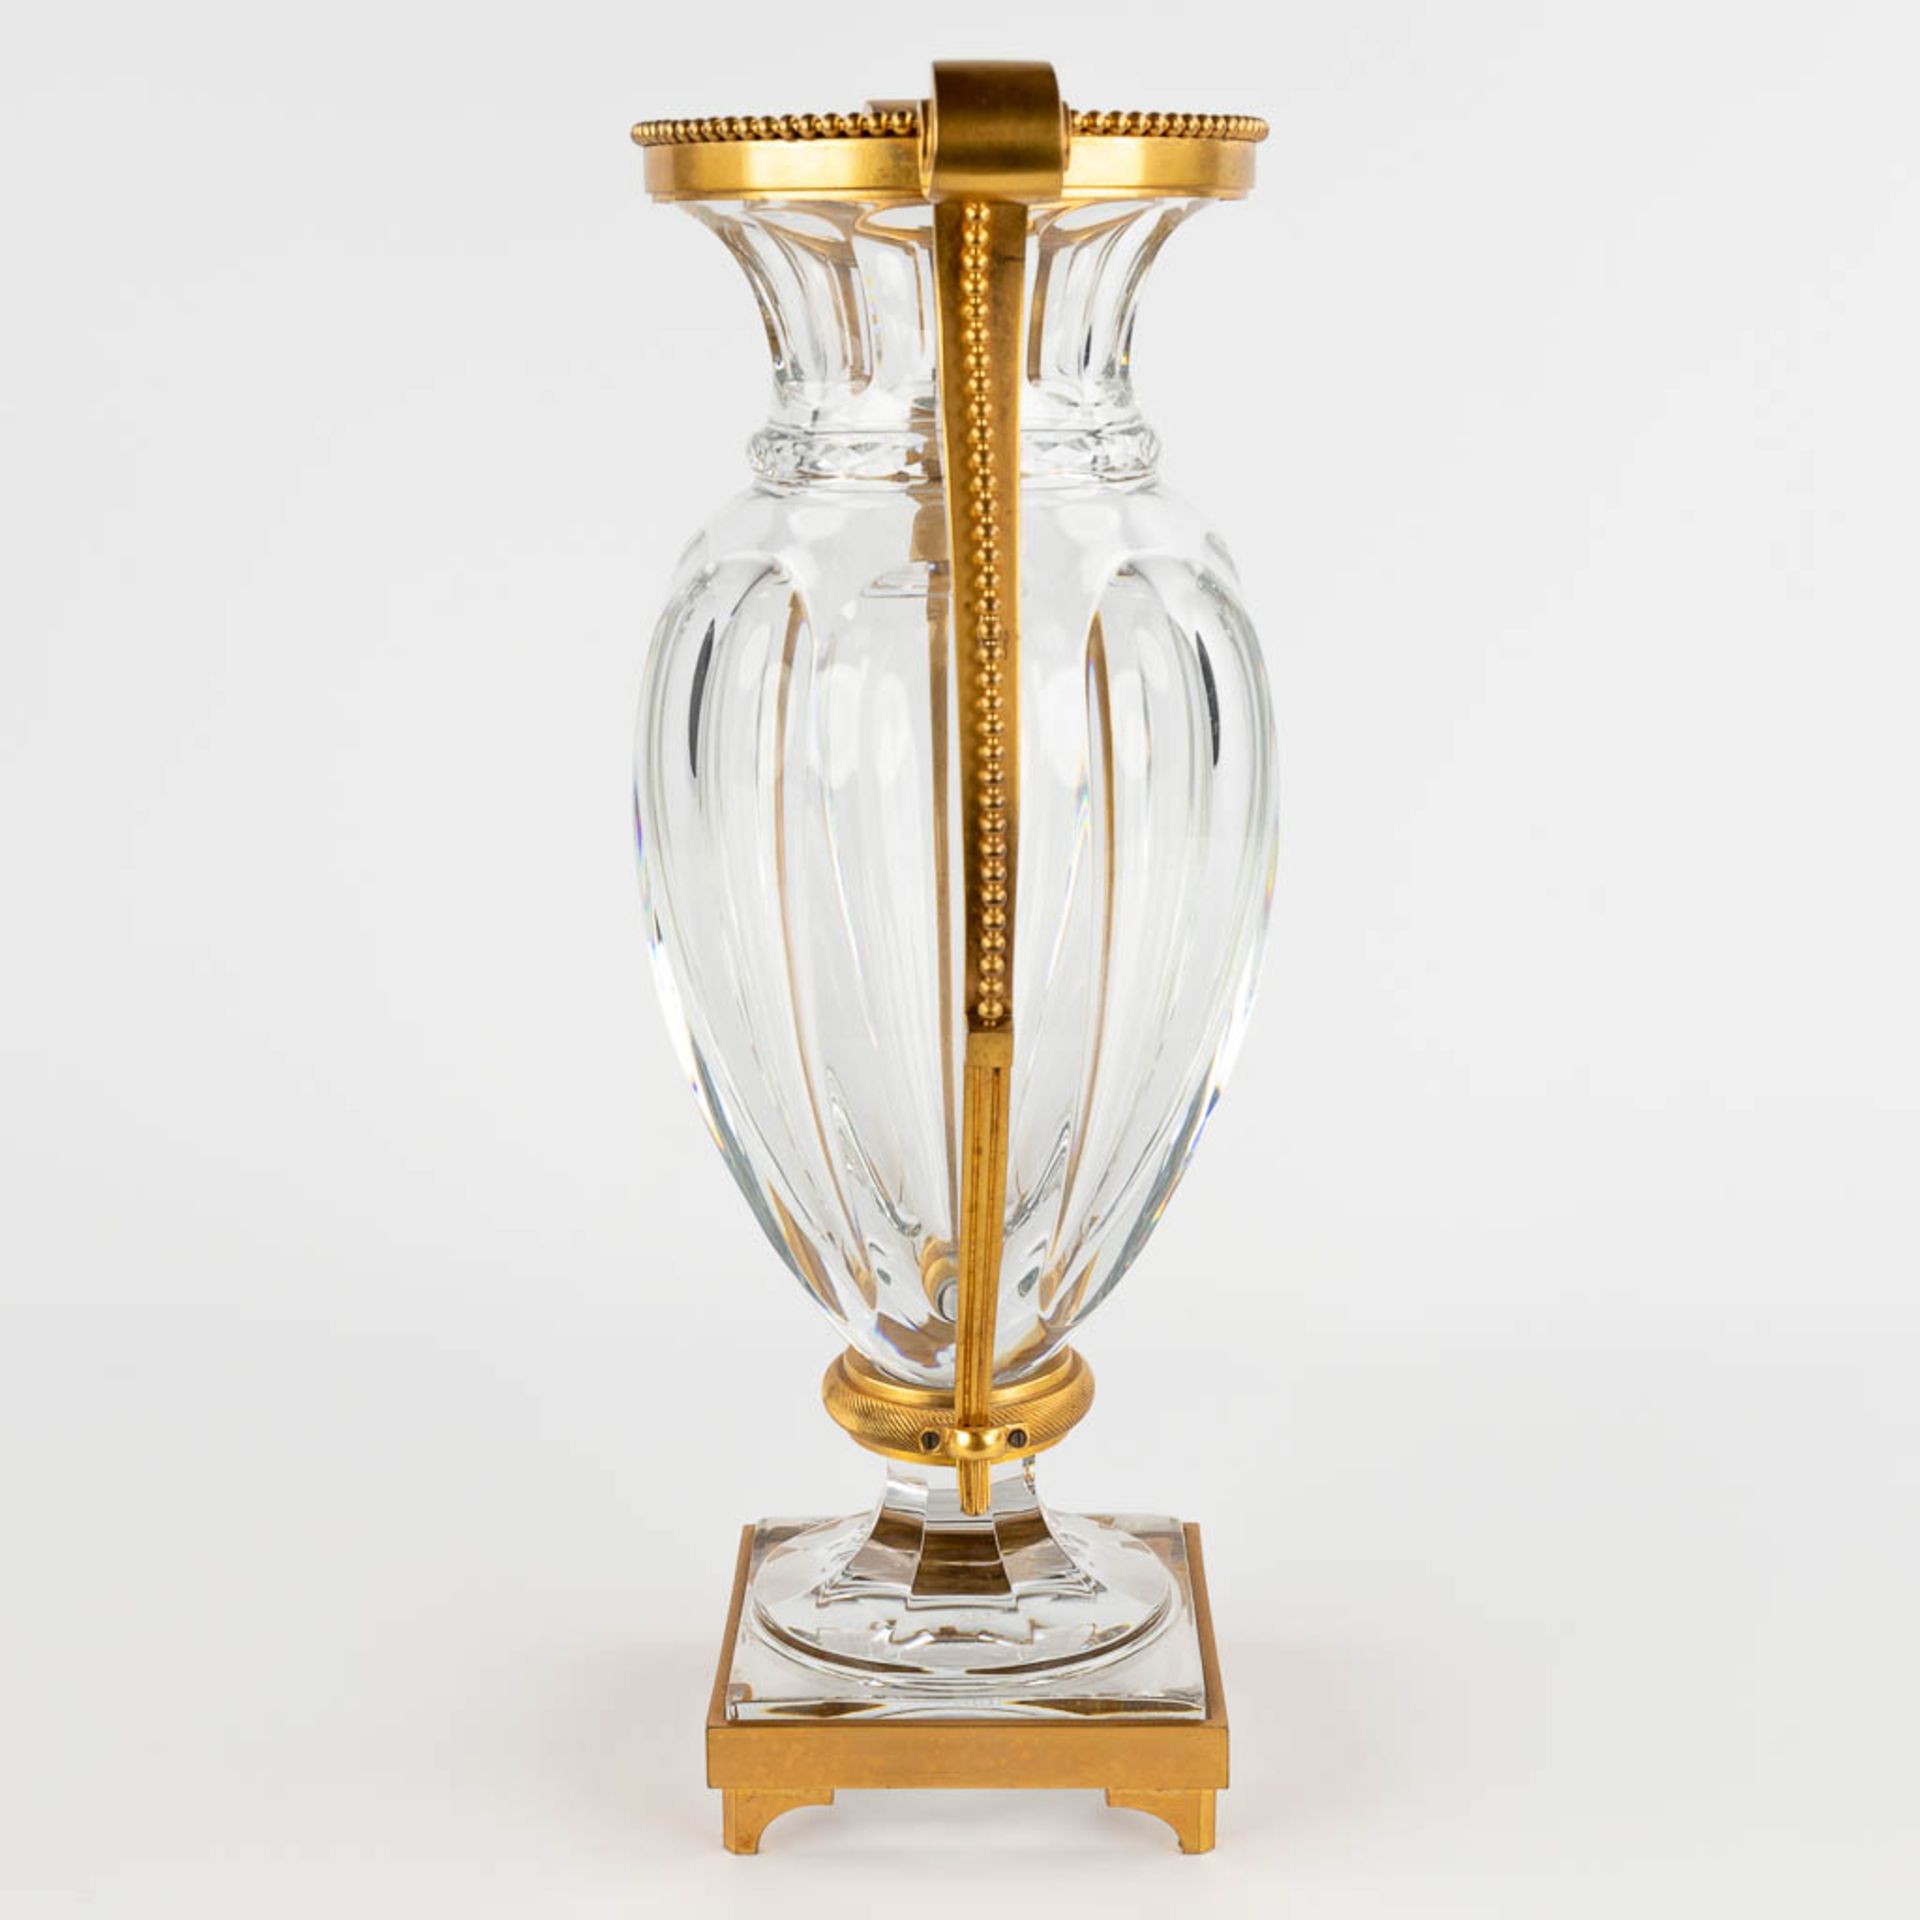 Baccarat, a large crystal vase mounted with gilt bronze. 20th C. (D:14 x W:22 x H:38,5 cm) - Image 4 of 12